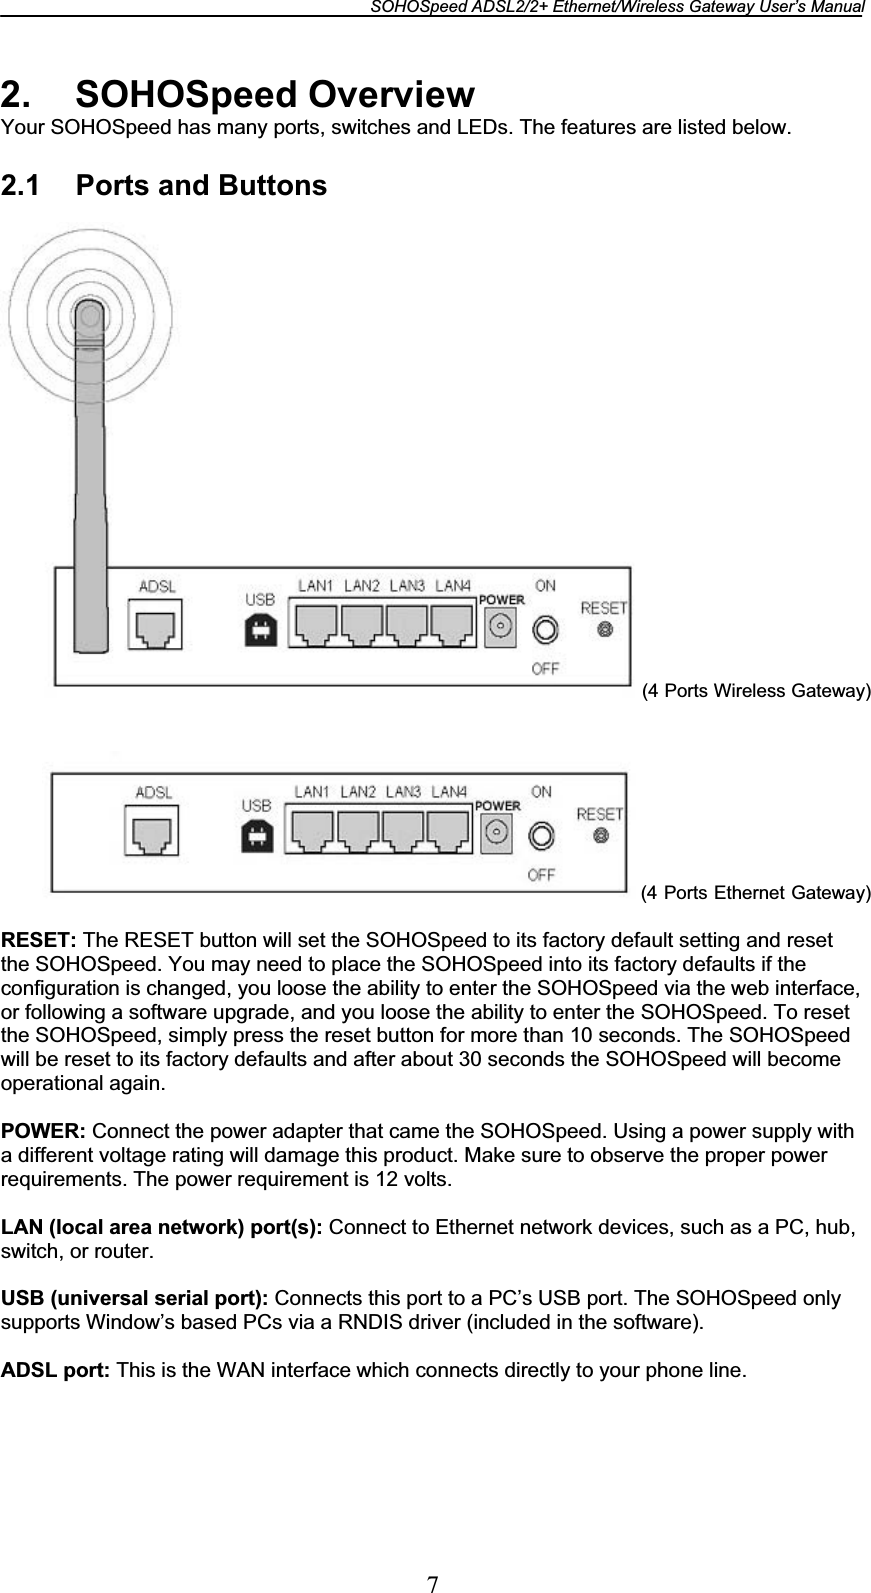 SOHOSpeed ADSL2/2+ Ethernet/Wireless Gateway User’s Manual 72. SOHOSpeed Overview Your SOHOSpeed has many ports, switches and LEDs. The features are listed below. 2.1  Ports and Buttons (4 Ports Wireless Gateway)           (4 Ports Ethernet Gateway)RESET: The RESET button will set the SOHOSpeed to its factory default setting and reset the SOHOSpeed. You may need to place the SOHOSpeed into its factory defaults if the configuration is changed, you loose the ability to enter the SOHOSpeed via the web interface, or following a software upgrade, and you loose the ability to enter the SOHOSpeed. To reset the SOHOSpeed, simply press the reset button for more than 10 seconds. The SOHOSpeed will be reset to its factory defaults and after about 30 seconds the SOHOSpeed will become operational again. POWER: Connect the power adapter that came the SOHOSpeed. Using a power supply with a different voltage rating will damage this product. Make sure to observe the proper power requirements. The power requirement is 12 volts. LAN (local area network) port(s): Connect to Ethernet network devices, such as a PC, hub, switch, or router. USB (universal serial port): Connects this port to a PC’s USB port. The SOHOSpeed only supports Window’s based PCs via a RNDIS driver (included in the software). ADSL port: This is the WAN interface which connects directly to your phone line. 